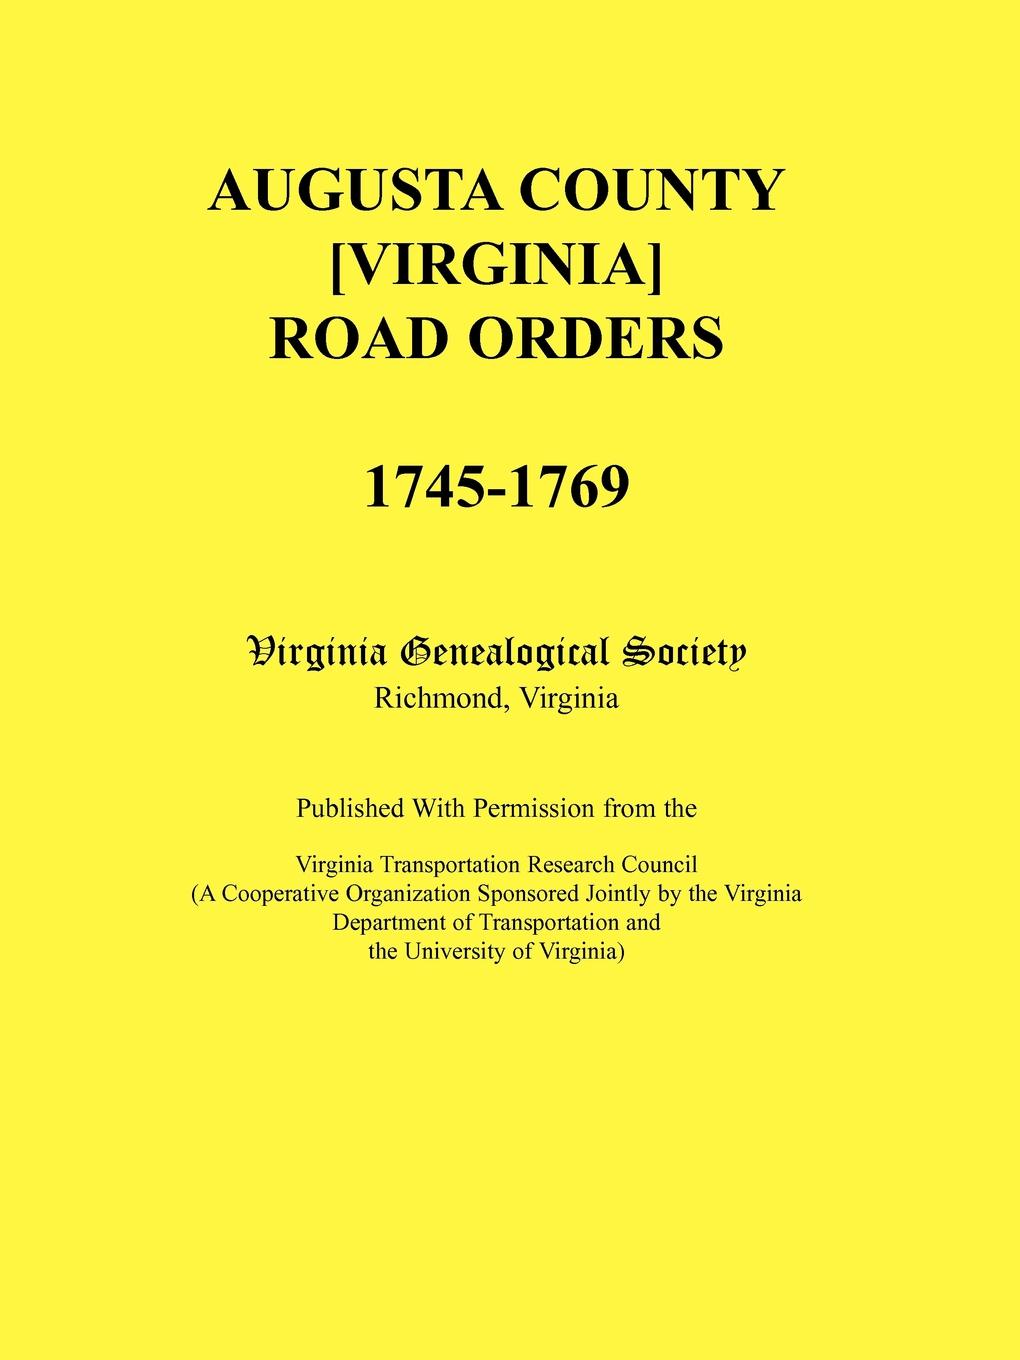 Augusta County .Virginia. Road Orders, 1745-1769. Published With Permission from the Virginia Transportation Research Council (A Cooperative Organization Sponsored Jointly by the Virginia Department of Transportation and the University of Virginia)